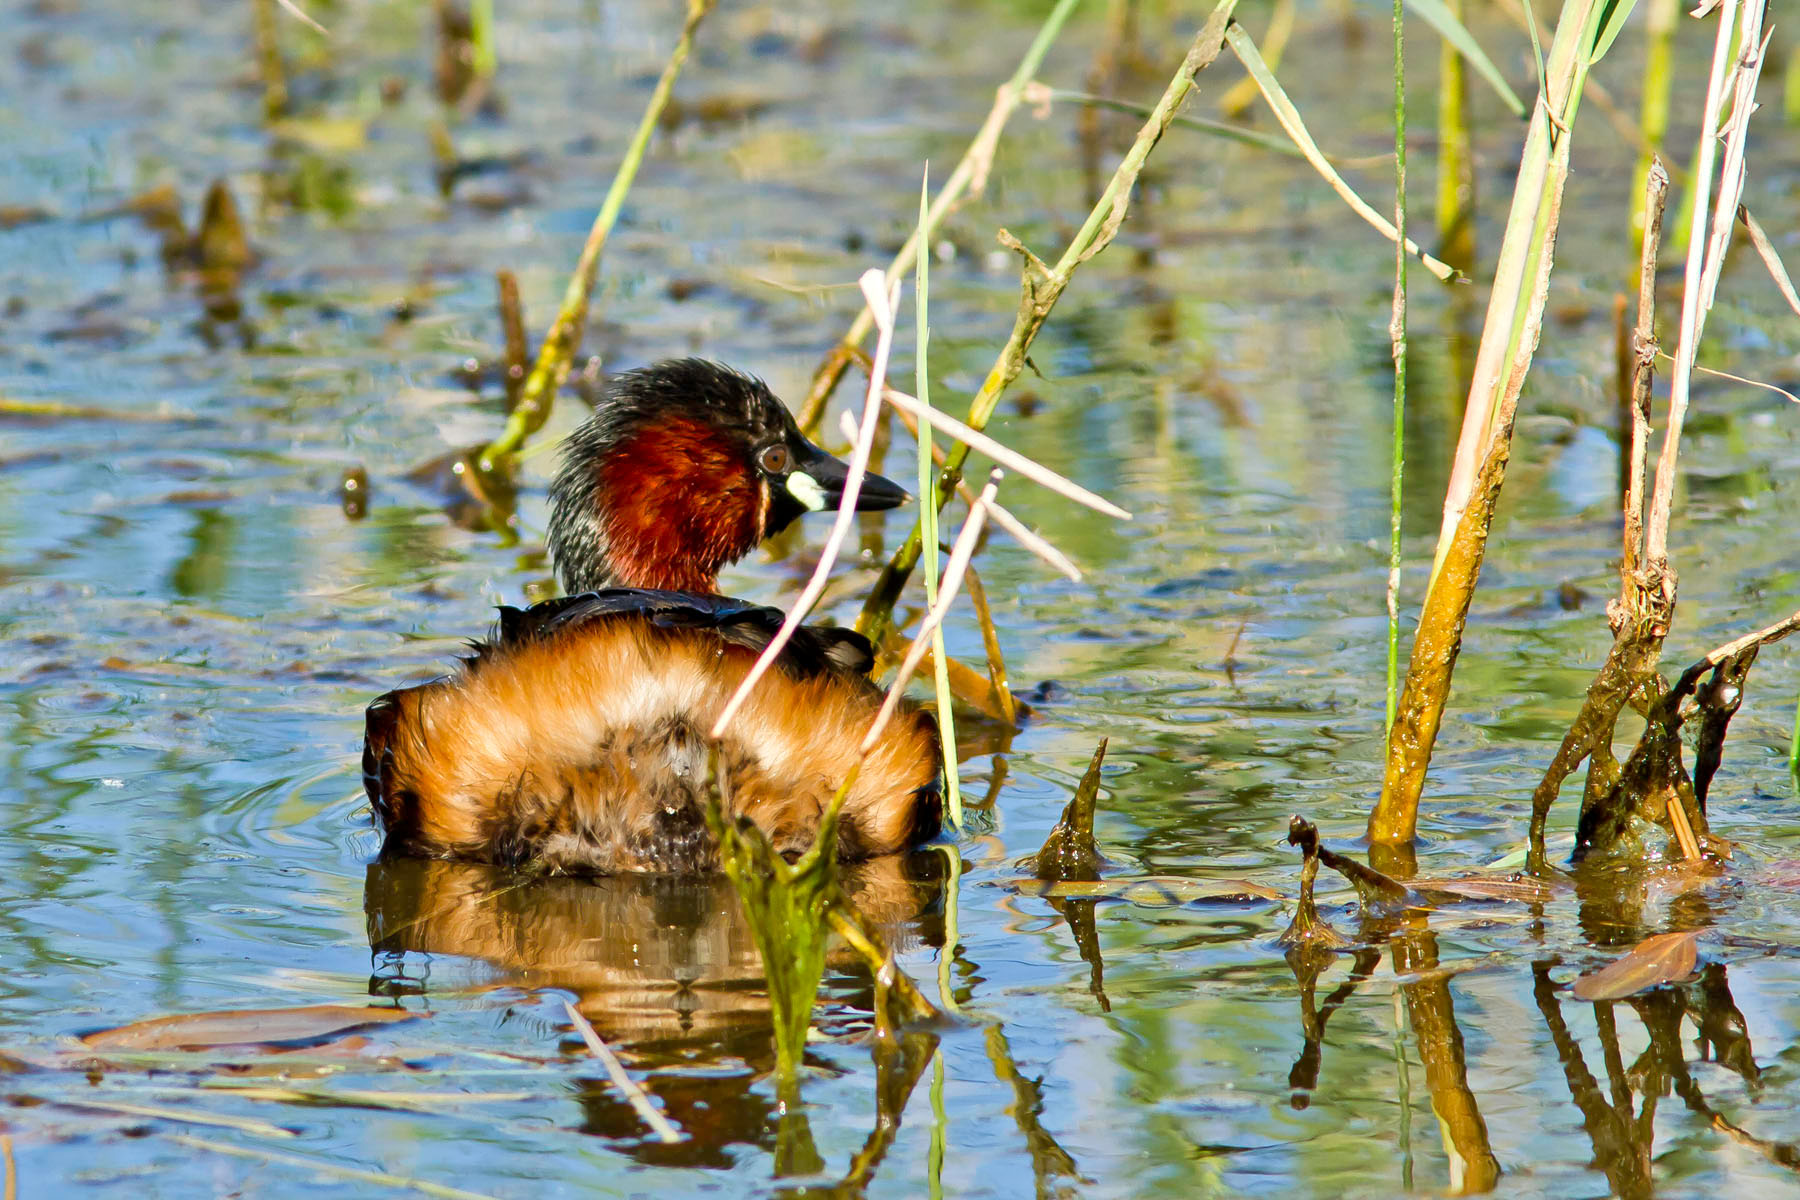 /Guewen/galeries/public/Nature/France/Grebes_Brenne/Grebes_011.jpg